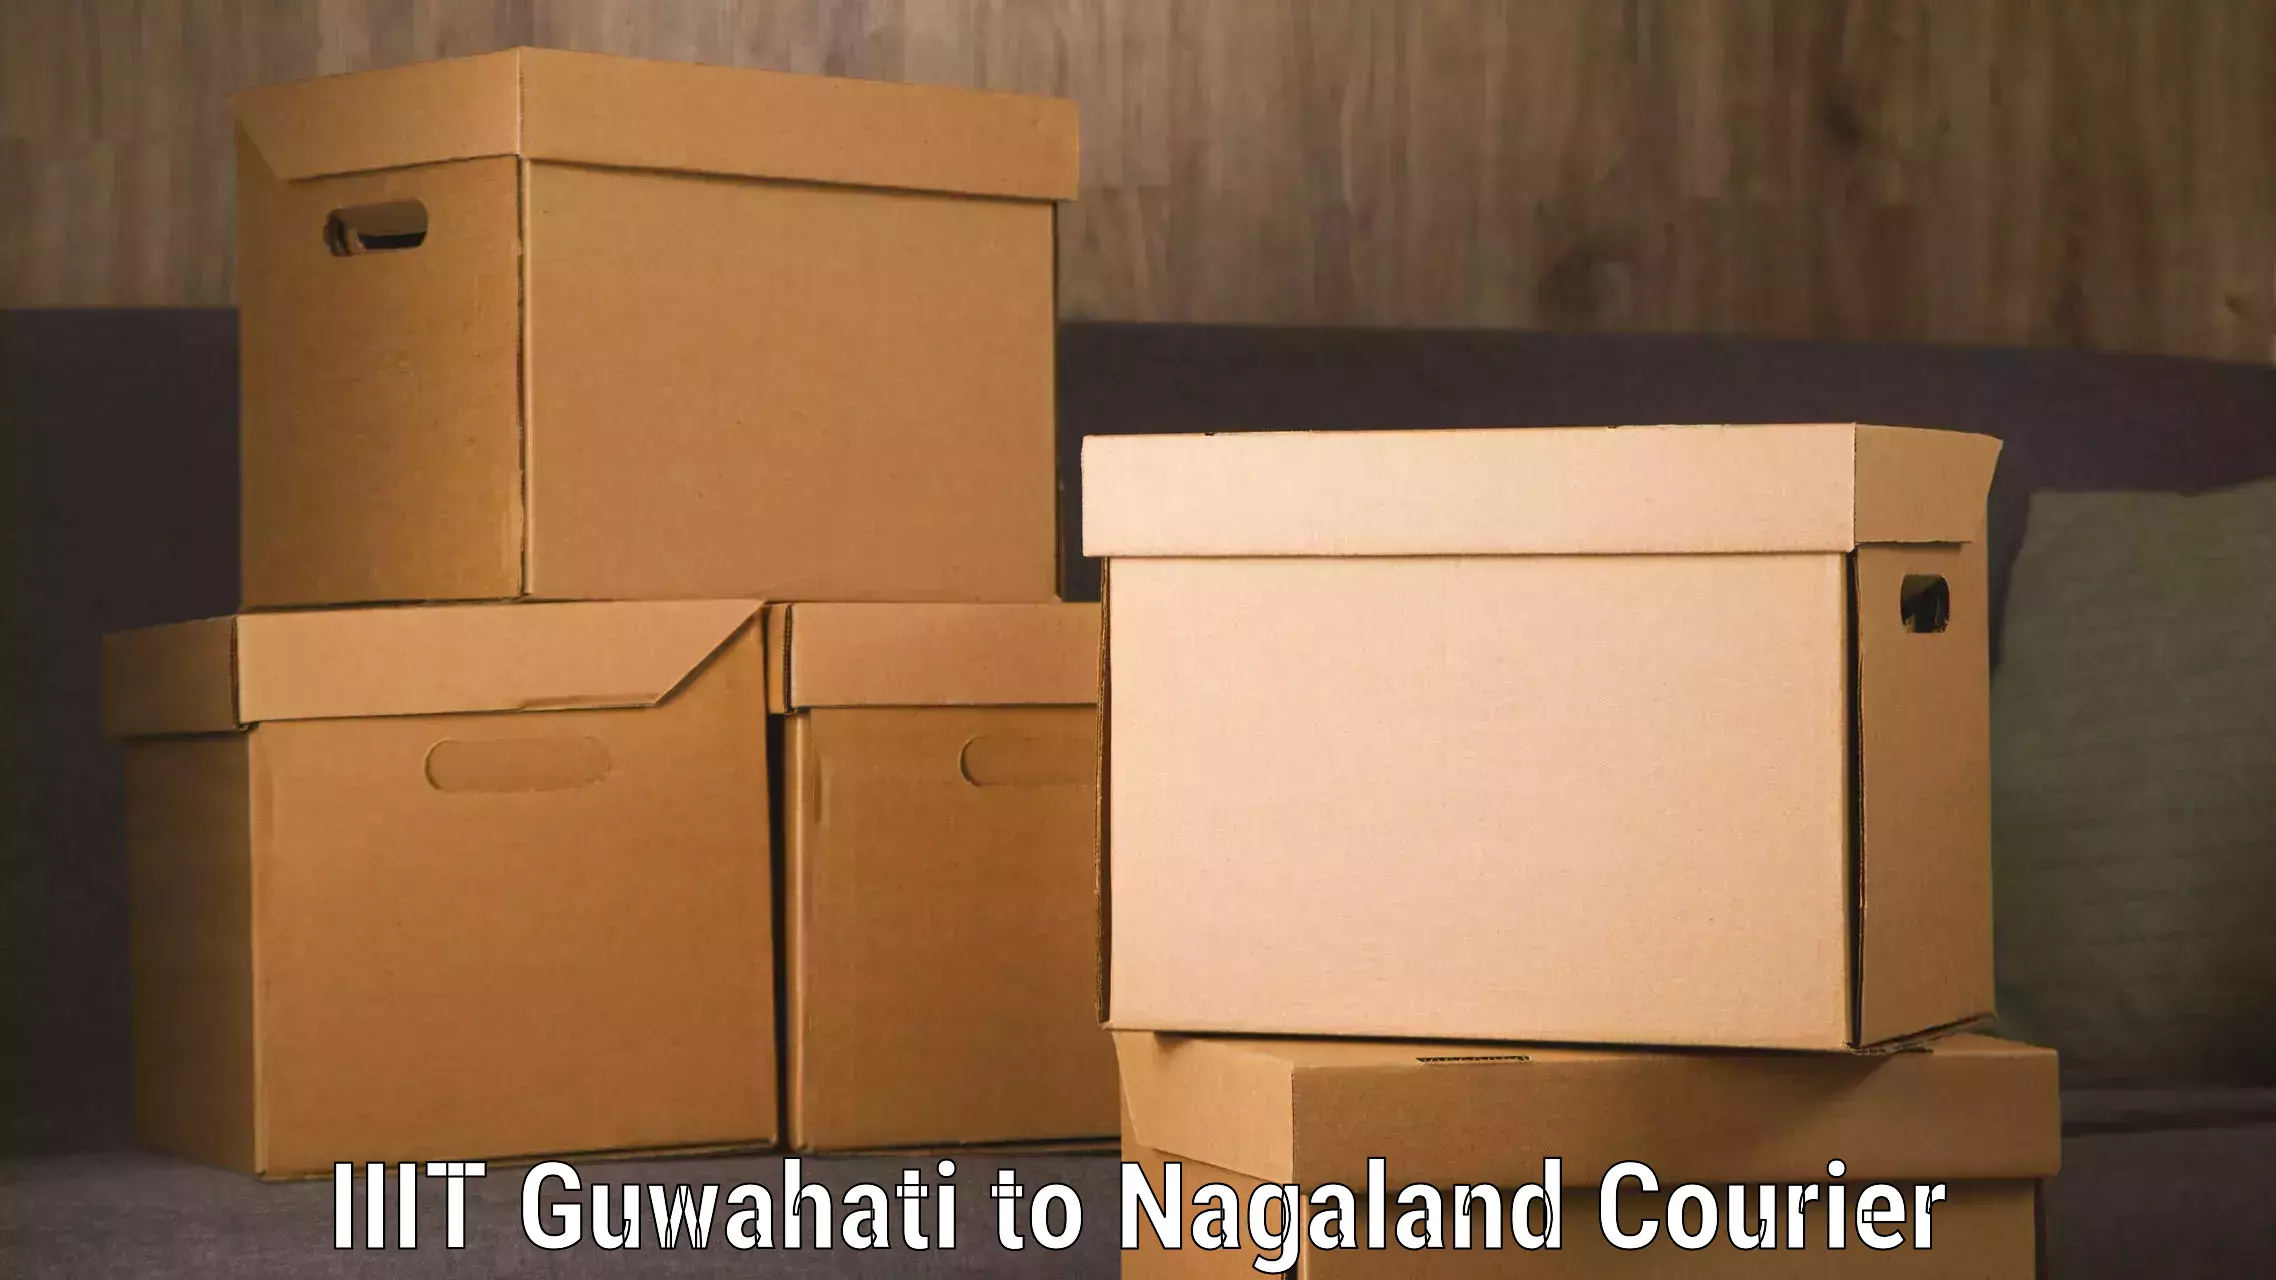 Luggage delivery solutions IIIT Guwahati to Nagaland